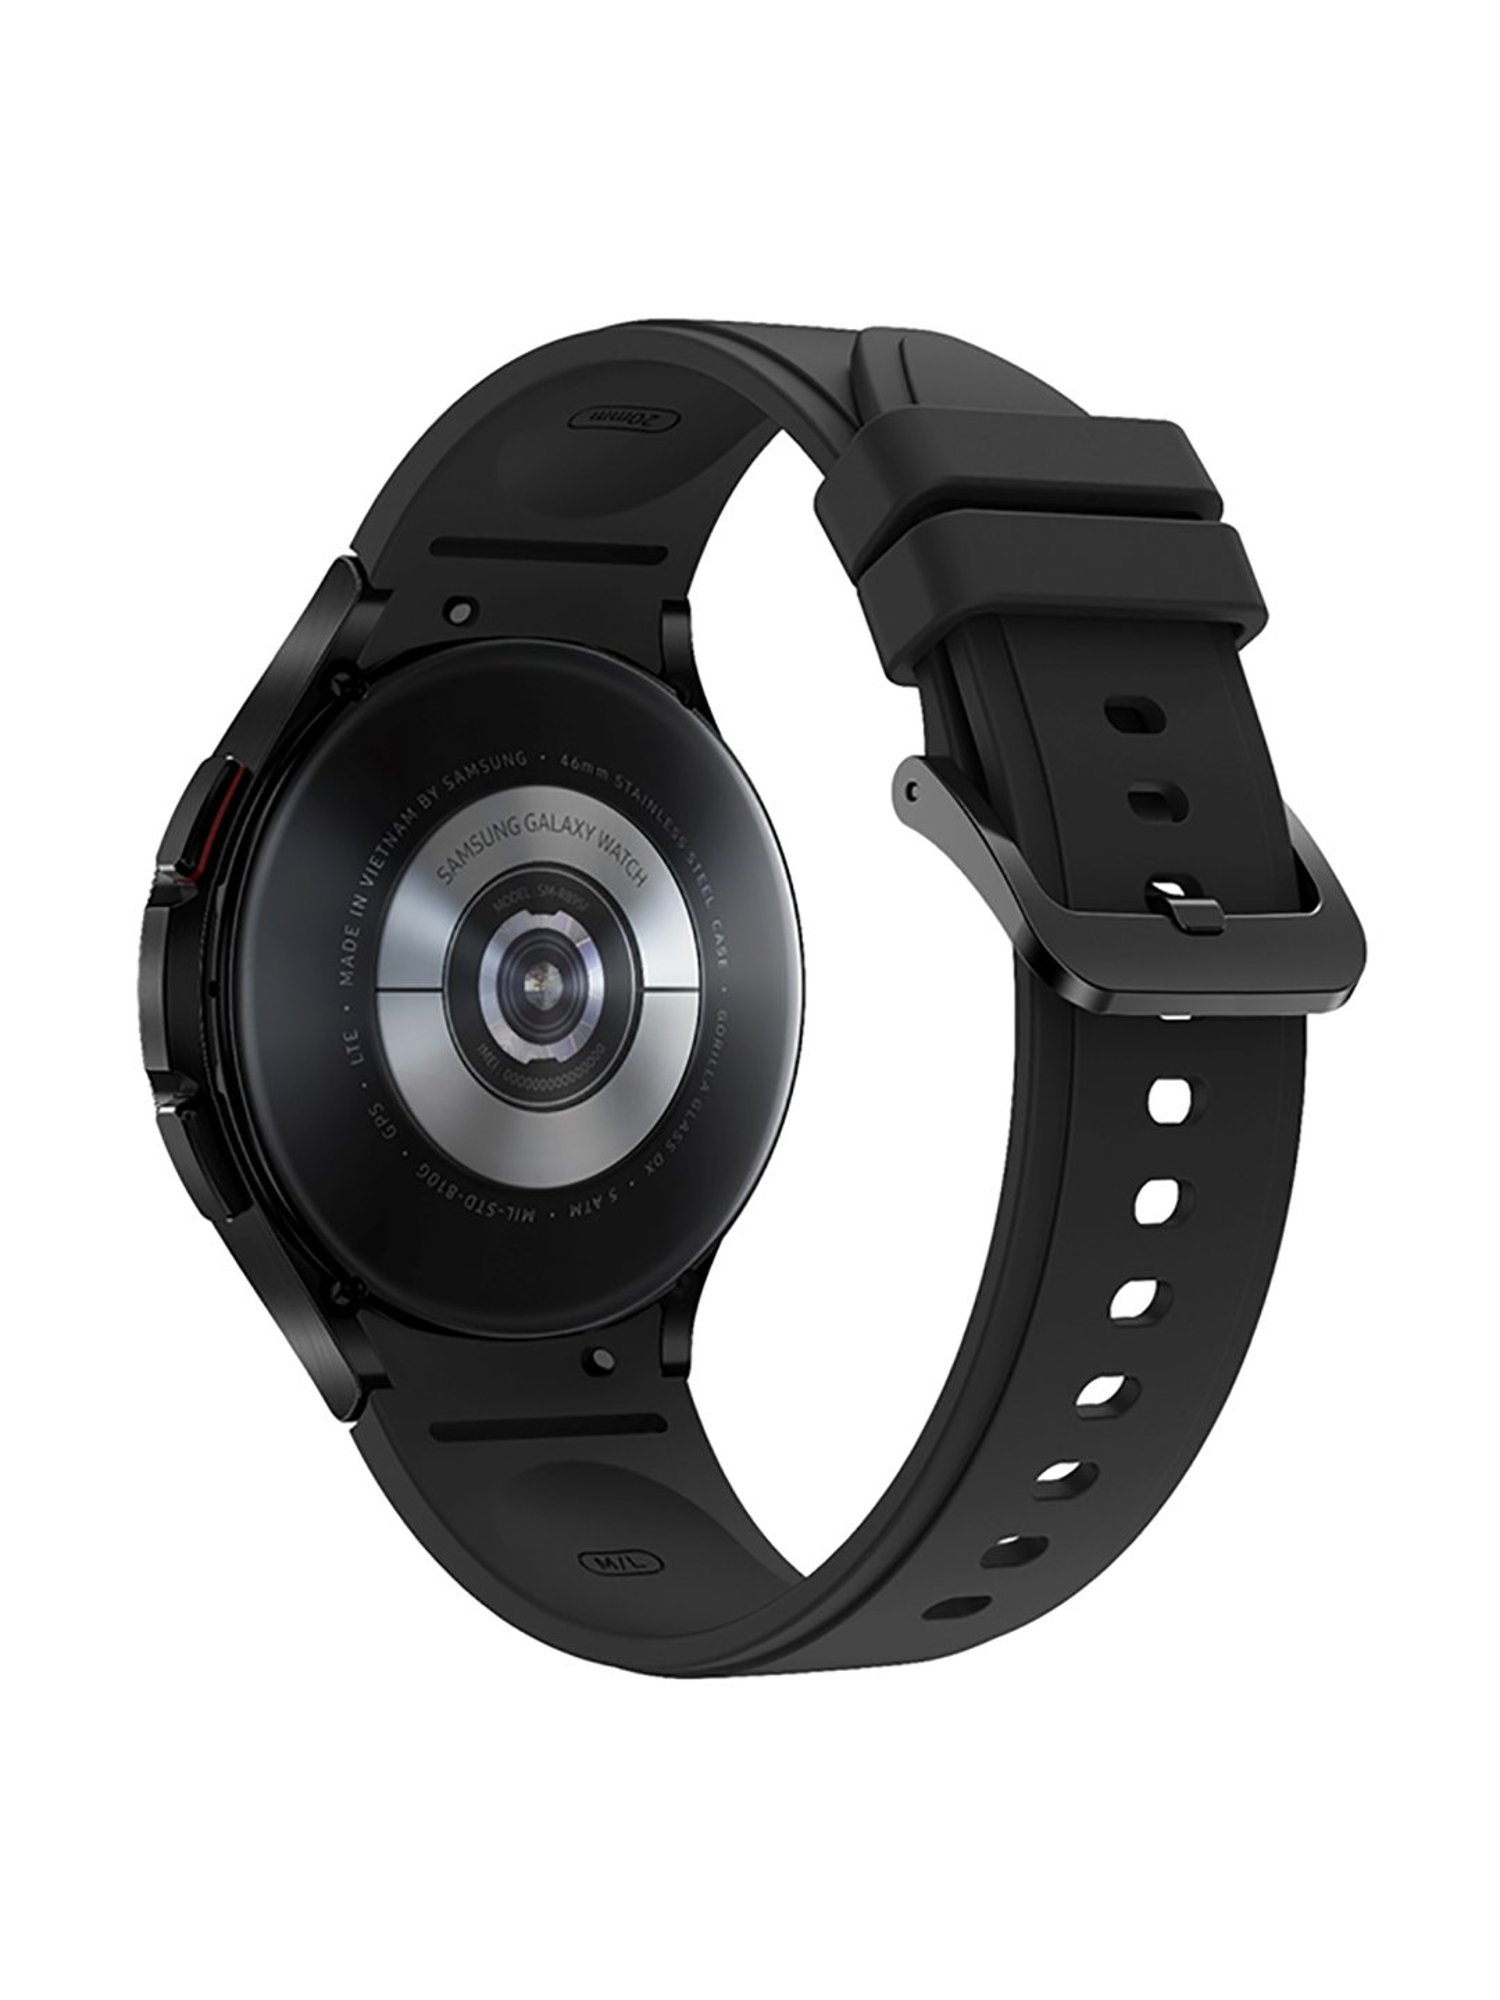 SI 4G-LTE Watc Smartwatch Price in India - Buy SI 4G-LTE Watc Smartwatch  online at Flipkart.com